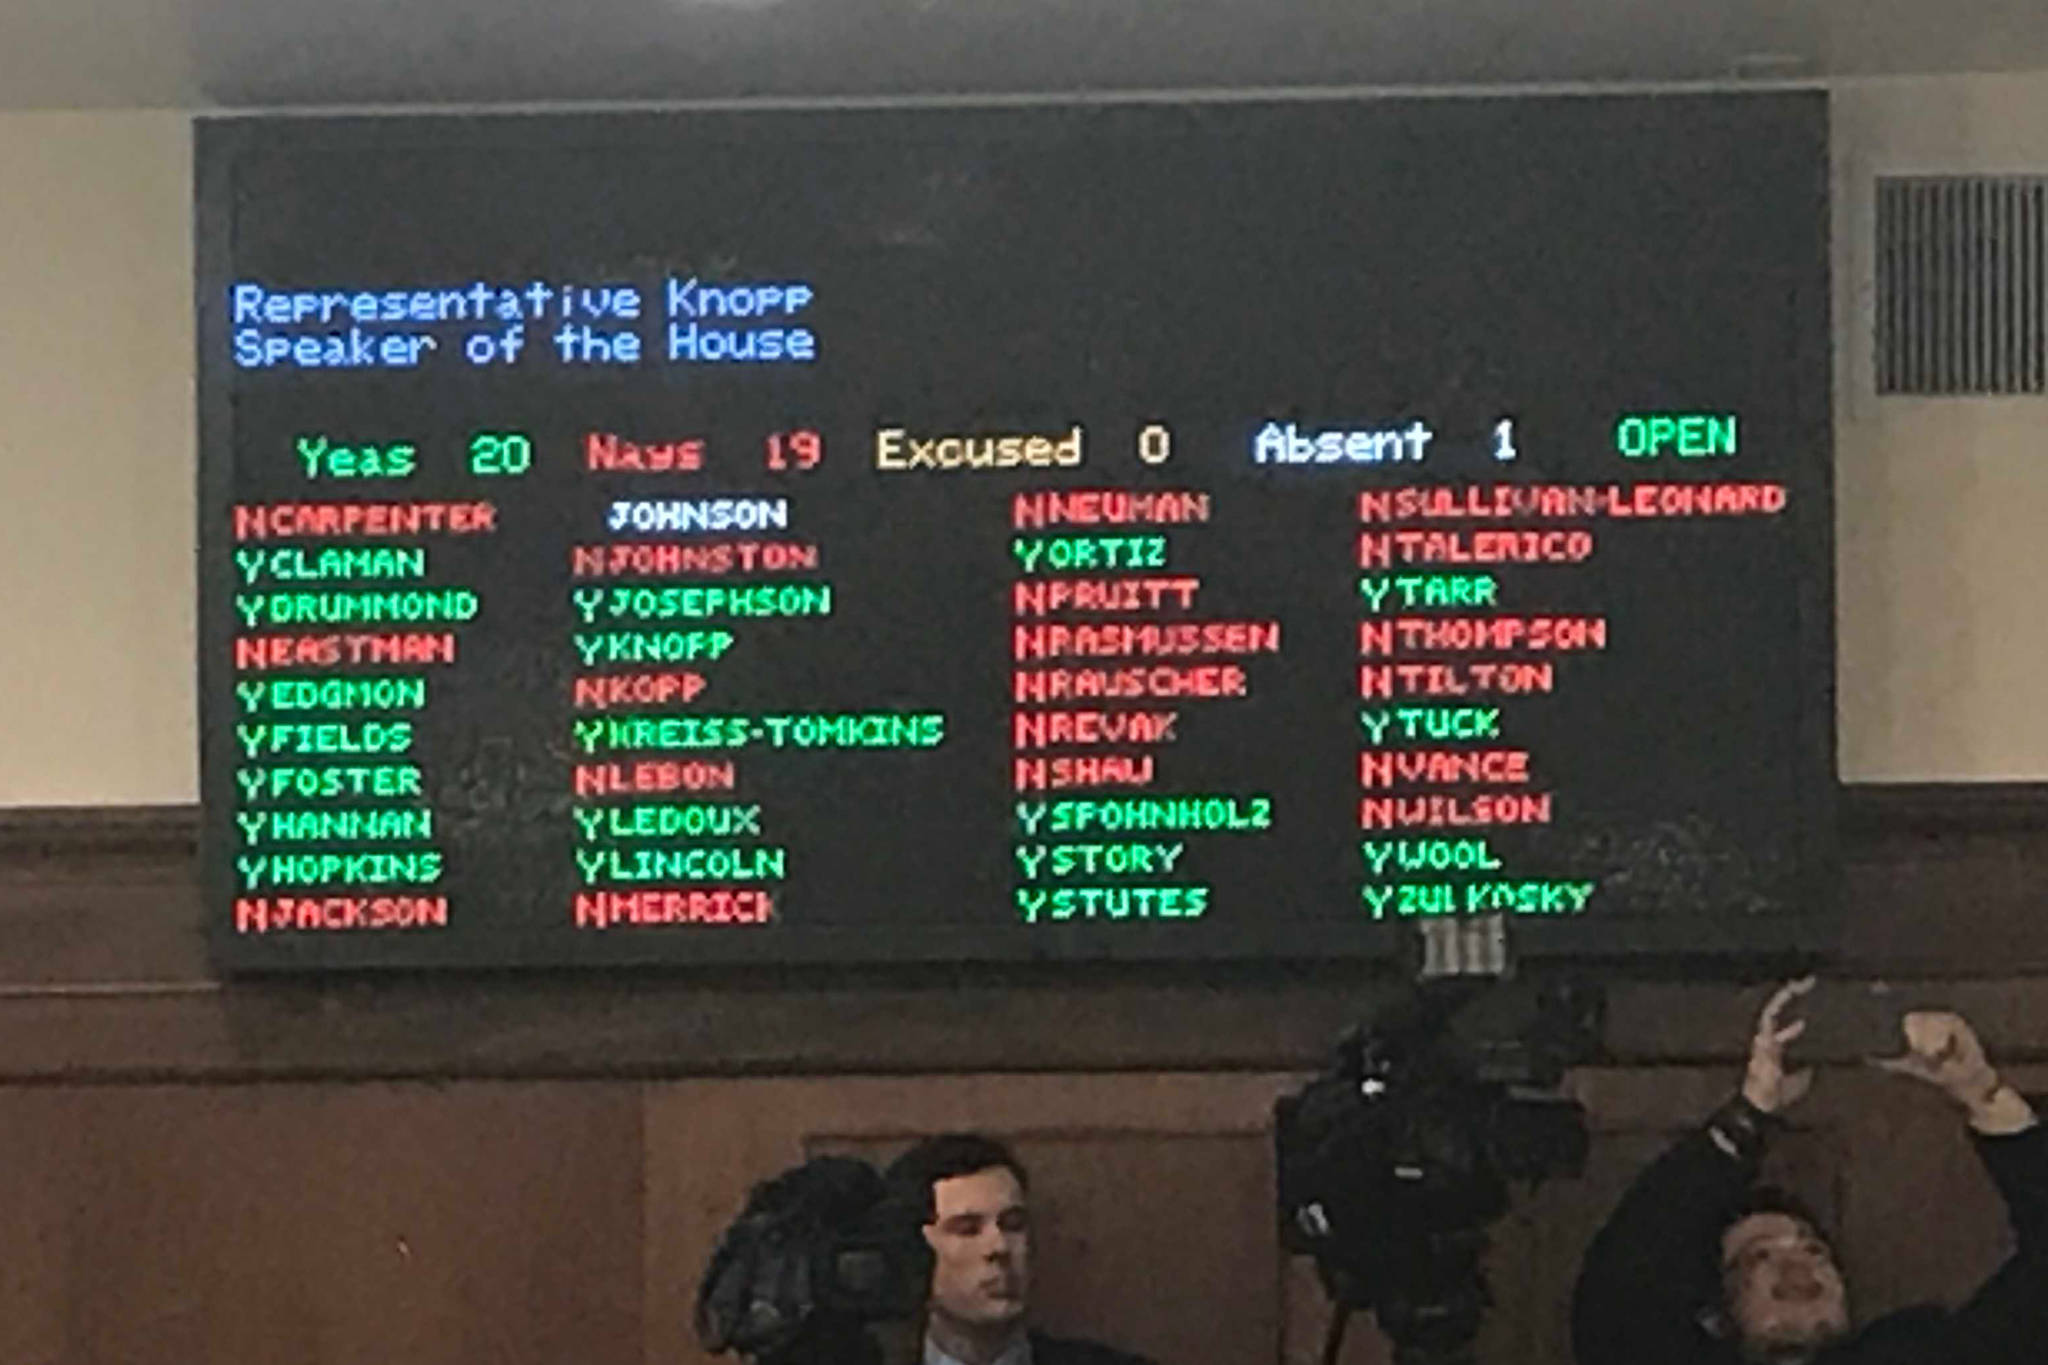 The board in the House of Representatives chamber shows the 20-20 vote on whether to name Rep. Gary Knopp, R-Kenai, the Speaker of the House. (Alex McCarthy | Juneau Empire)